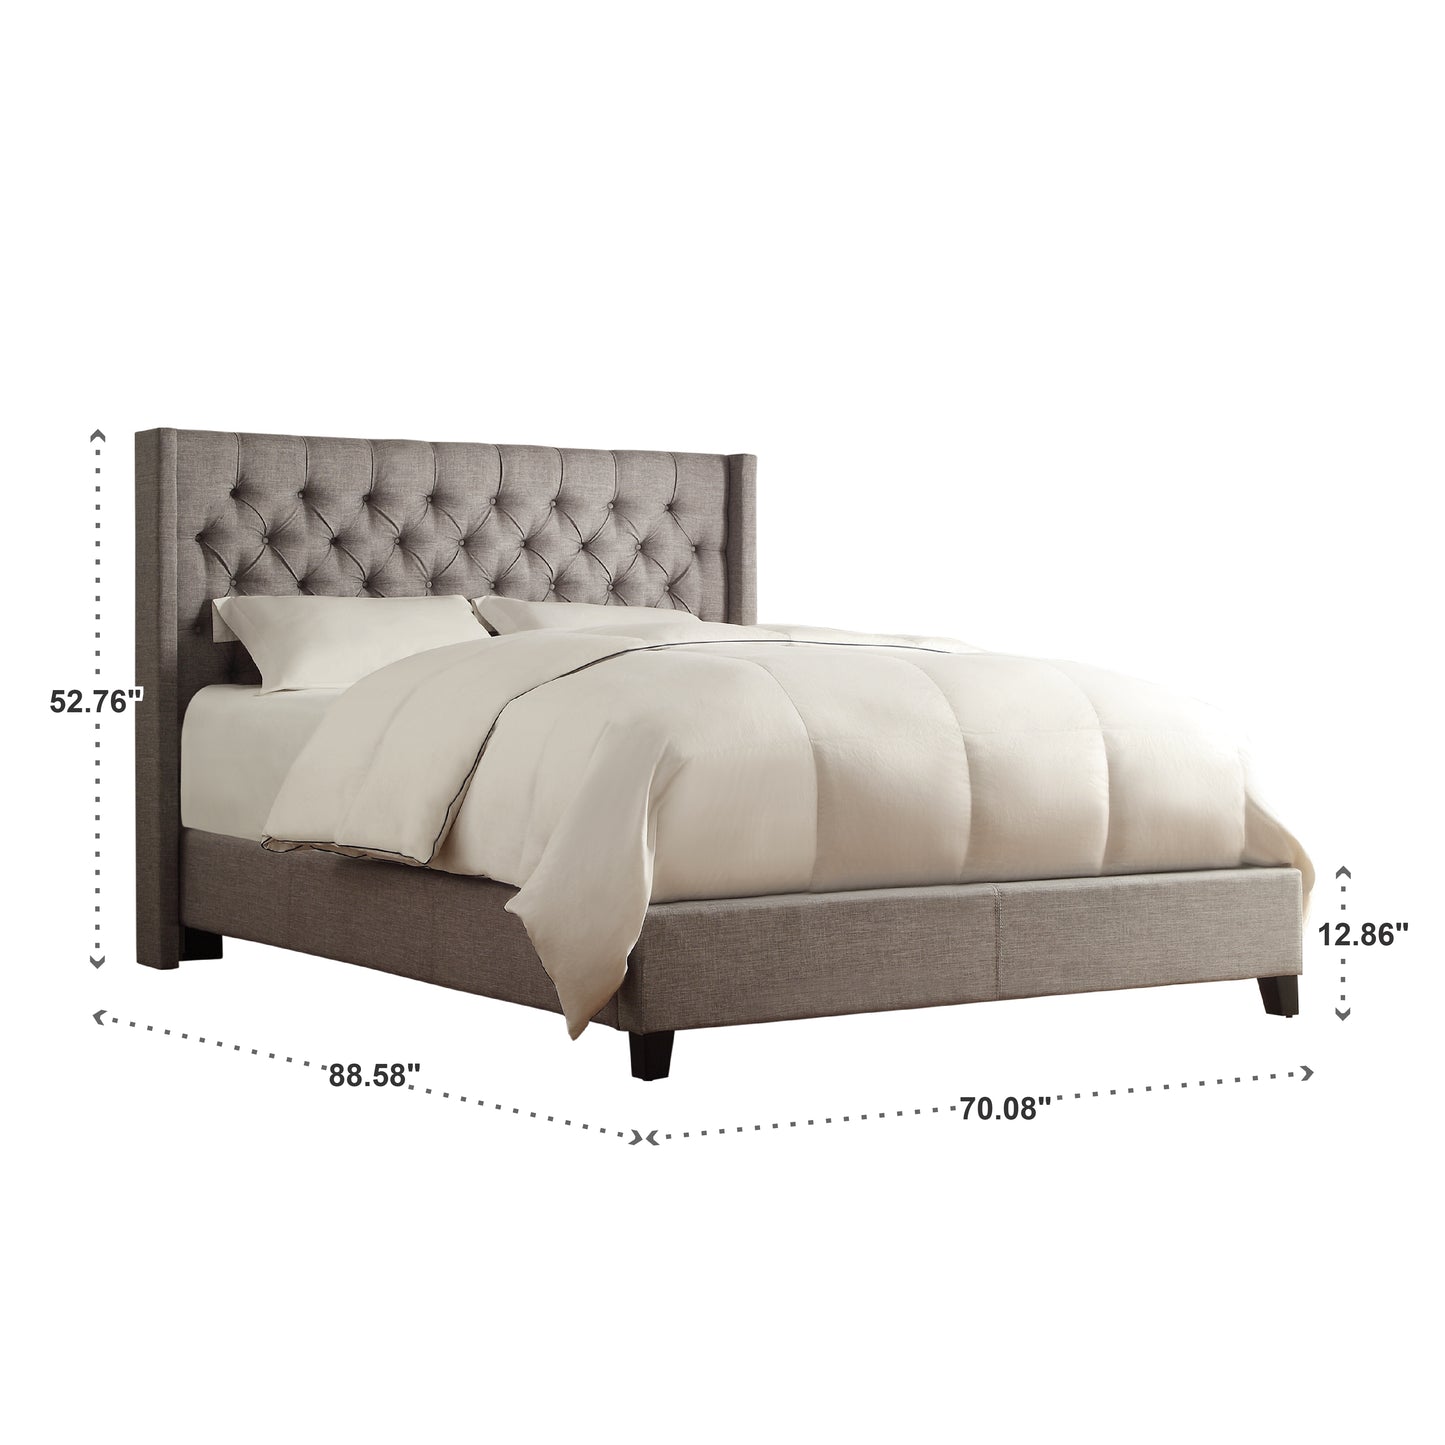 Wingback Button Tufted Platform Bed - Grey Linen, Queen